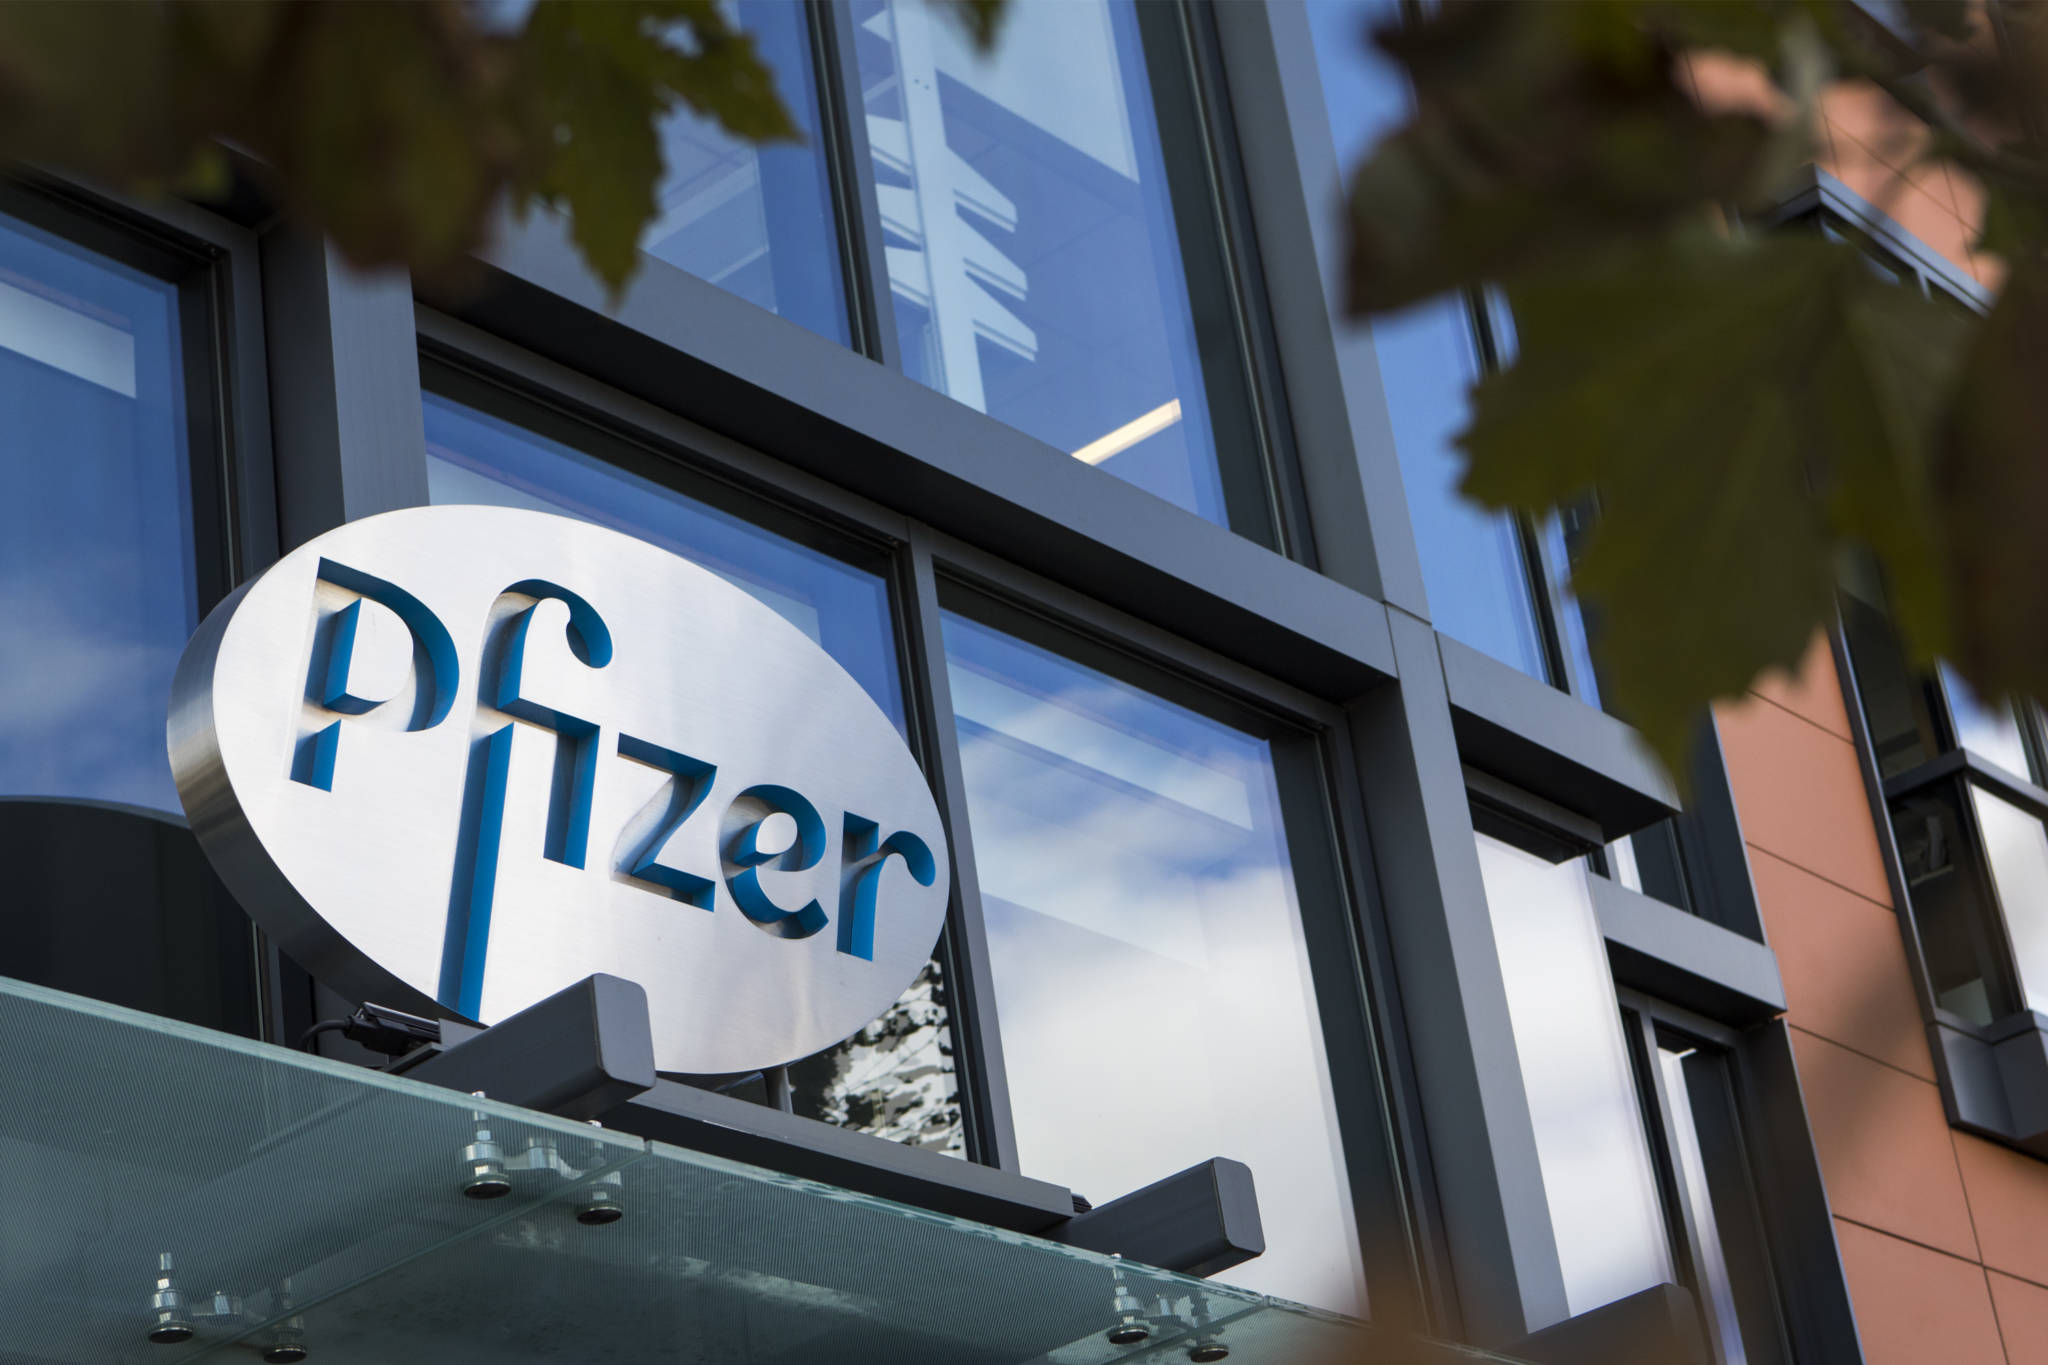 Covid Vaccine 90% Effective In Phase 3 Trial, Says Pfizer